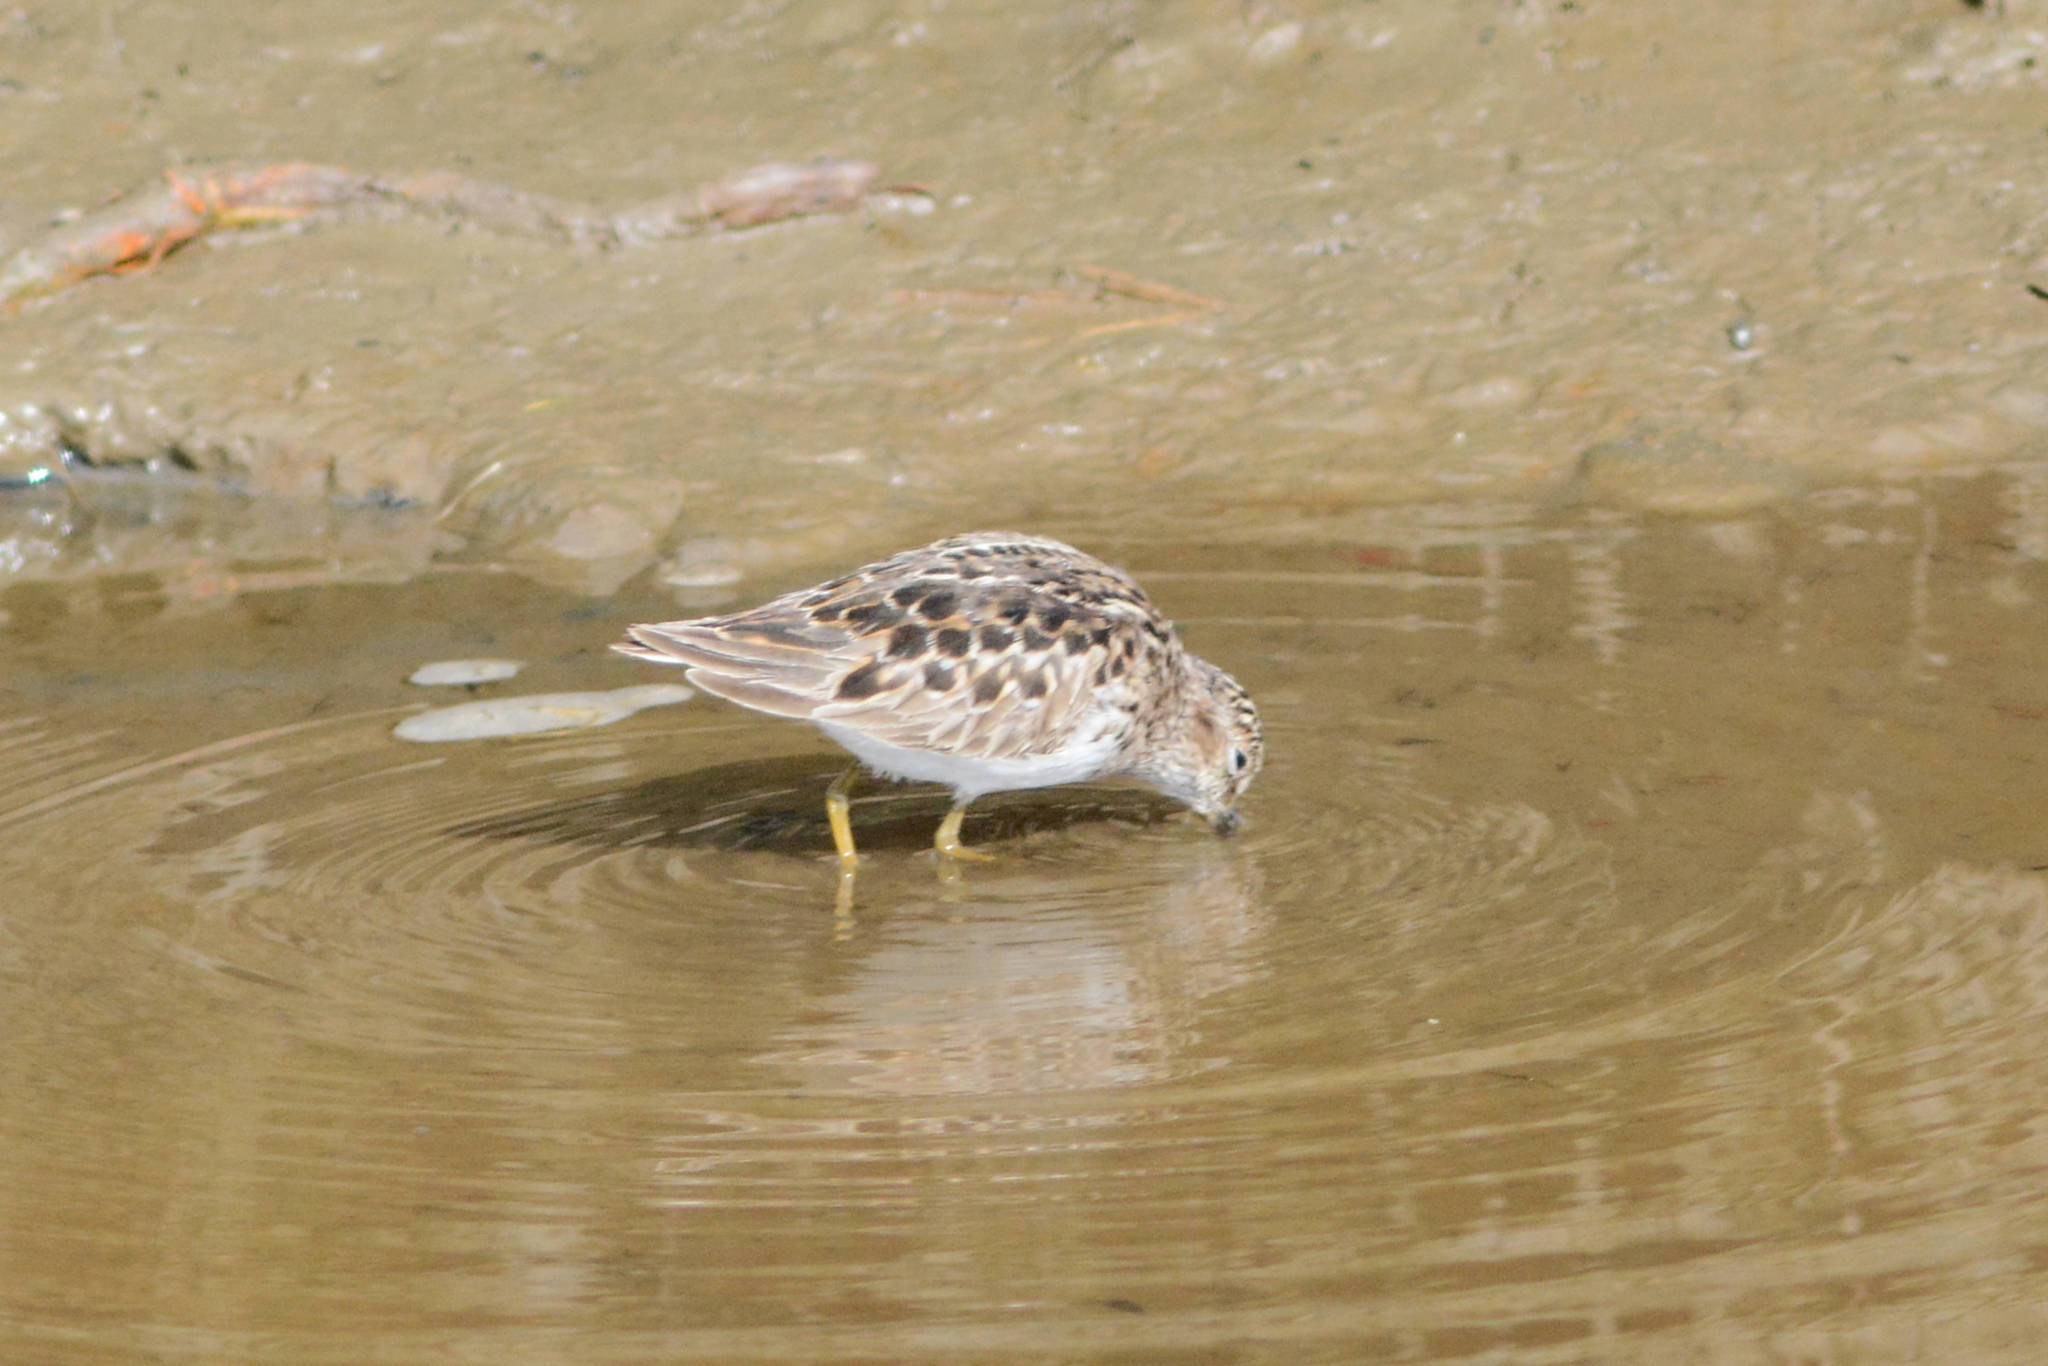 A least sandpiper feeds in Beluga Slough on Sunday, May 9, 2021, in Homer, Alaska. (Photo by Michael Armstrong/Homer News)